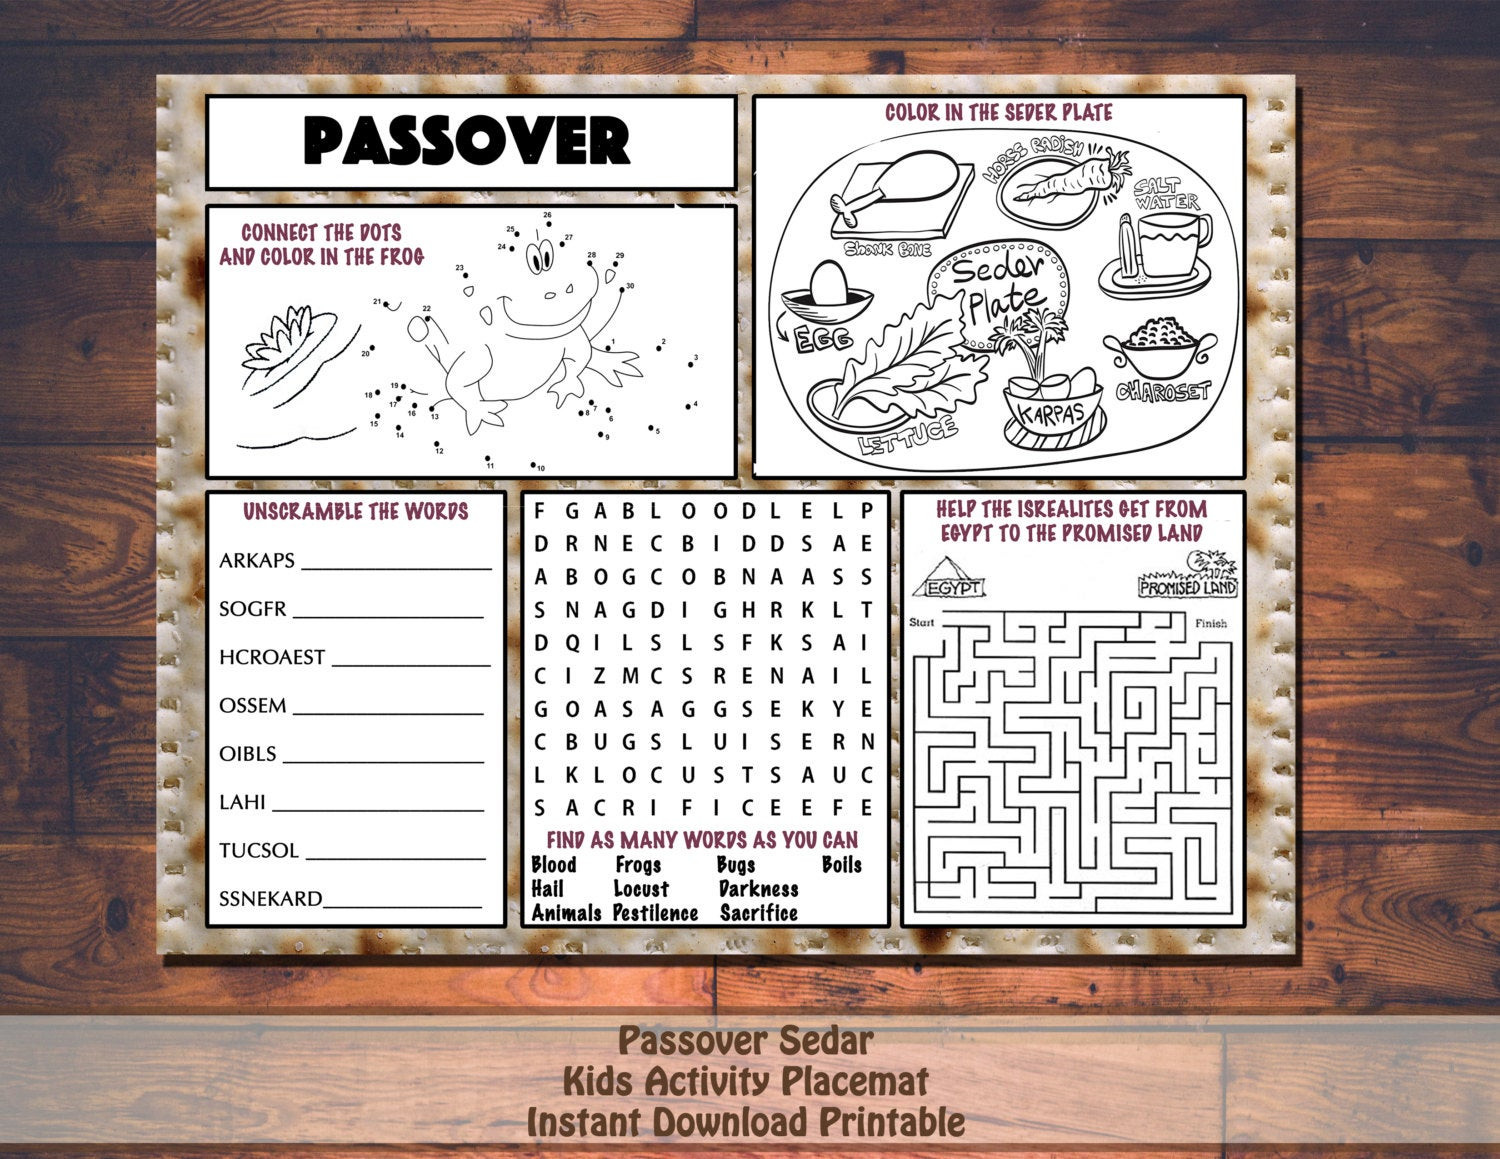 Passover Activities For Kids
 Kids Passover Pesach Activity Printable Placemat Instant